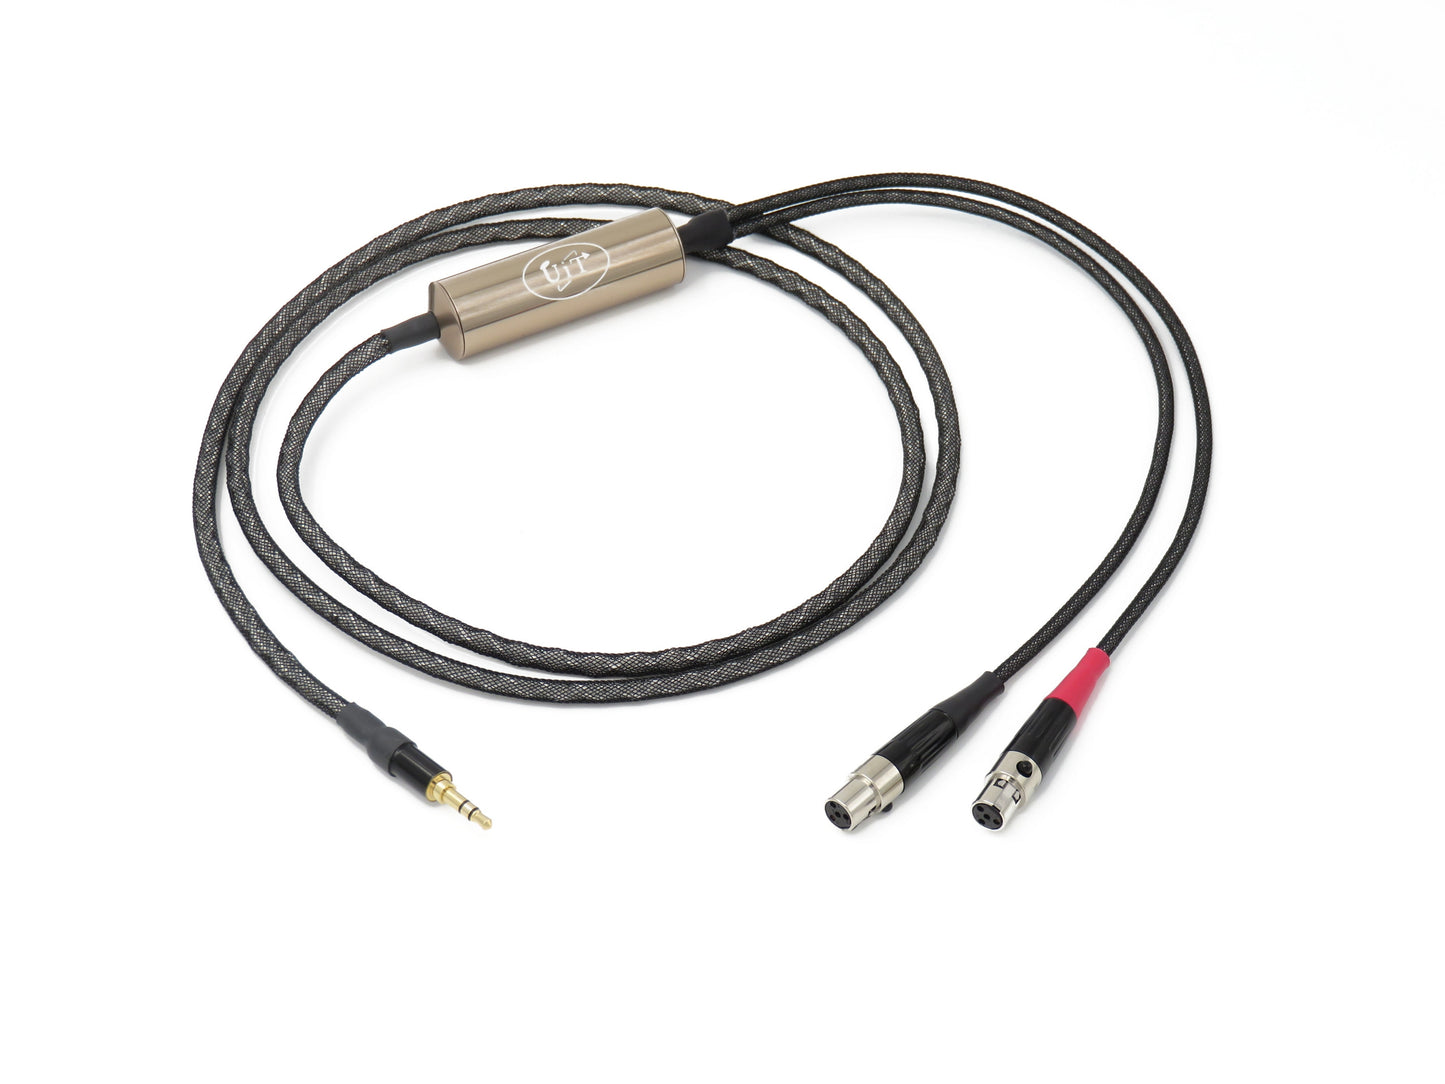 PMP-353-LCD - Perfect Music Purifier Headphone Cable for Audeze LCD Series